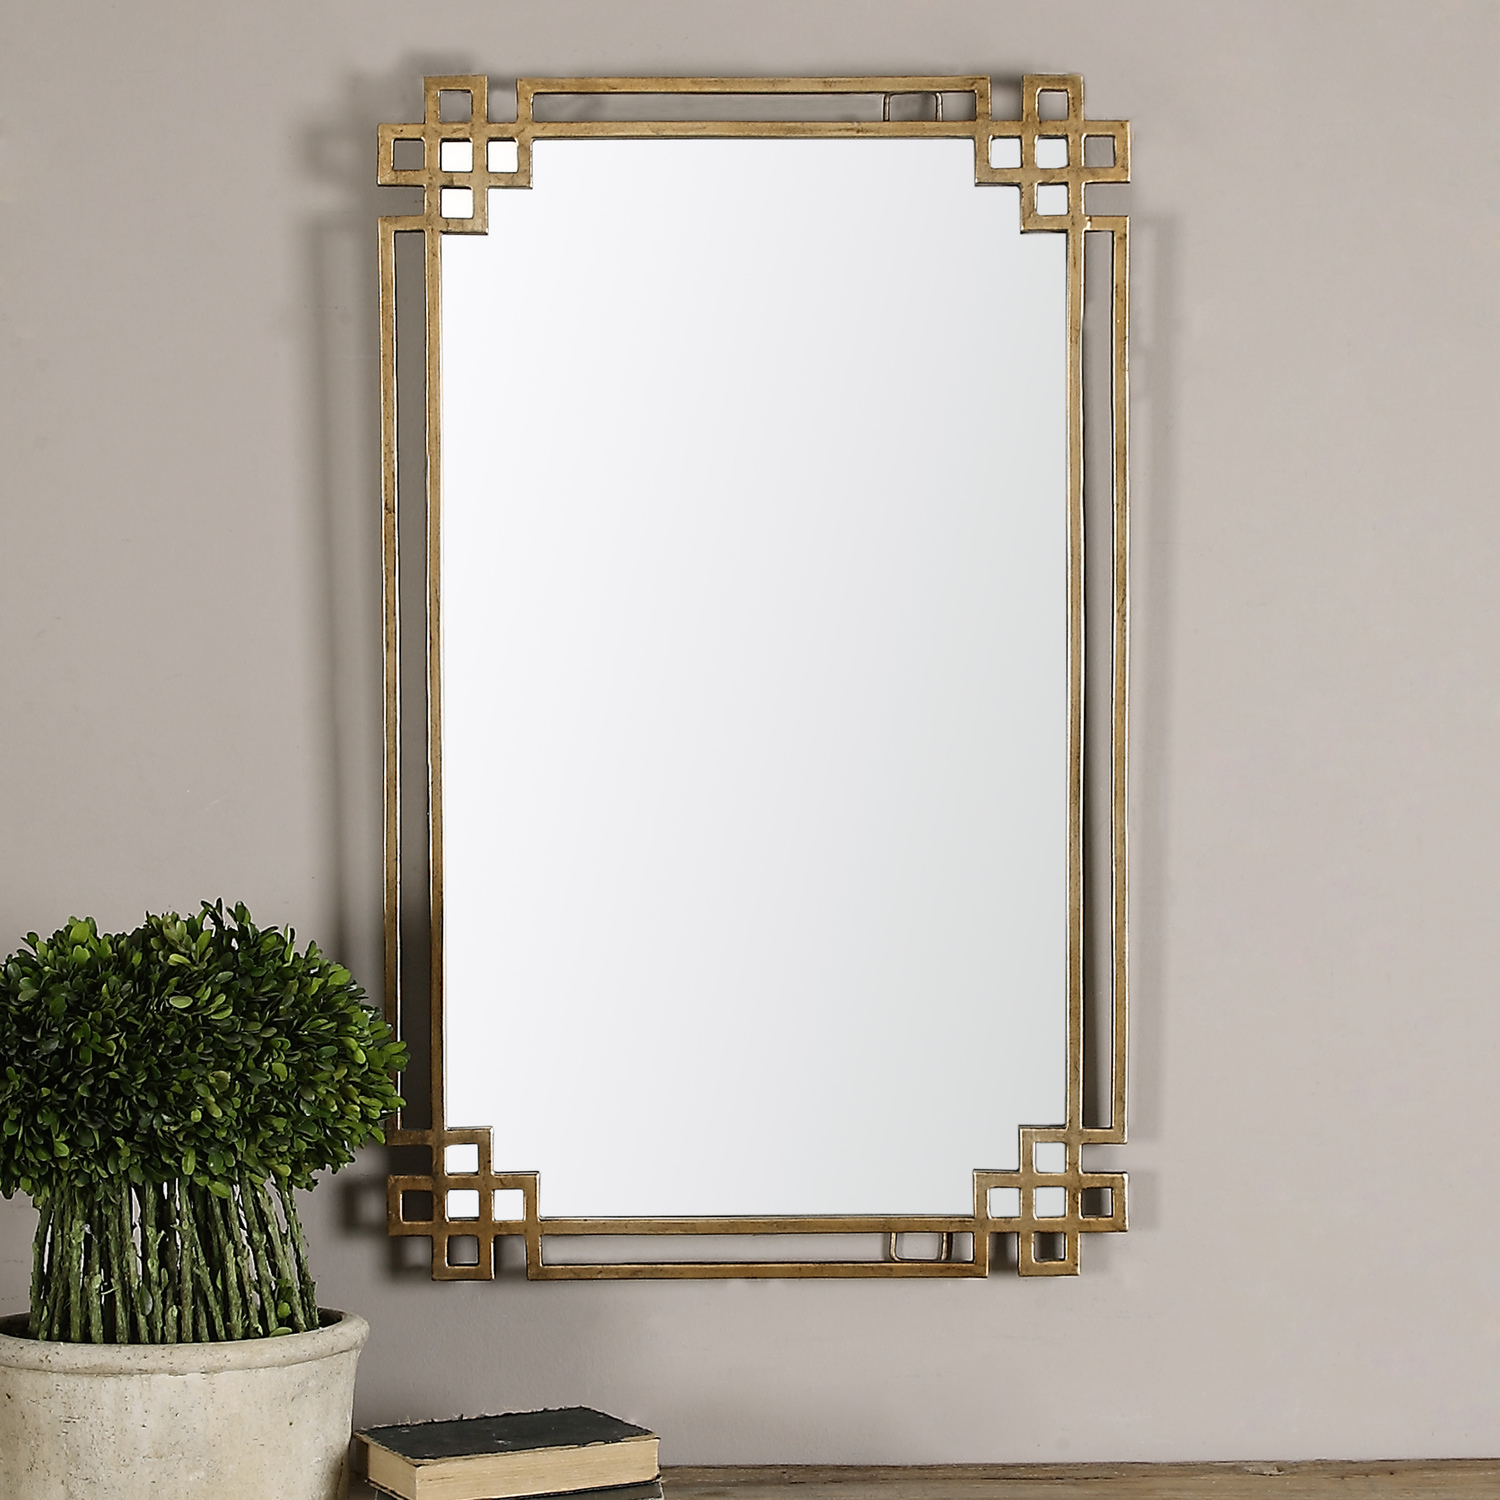 wall mirror long design Uttermost Antique Gold Mirrors Hand Forged Metal Finished In A Plated Oxidized Gold With Light Antiquing.